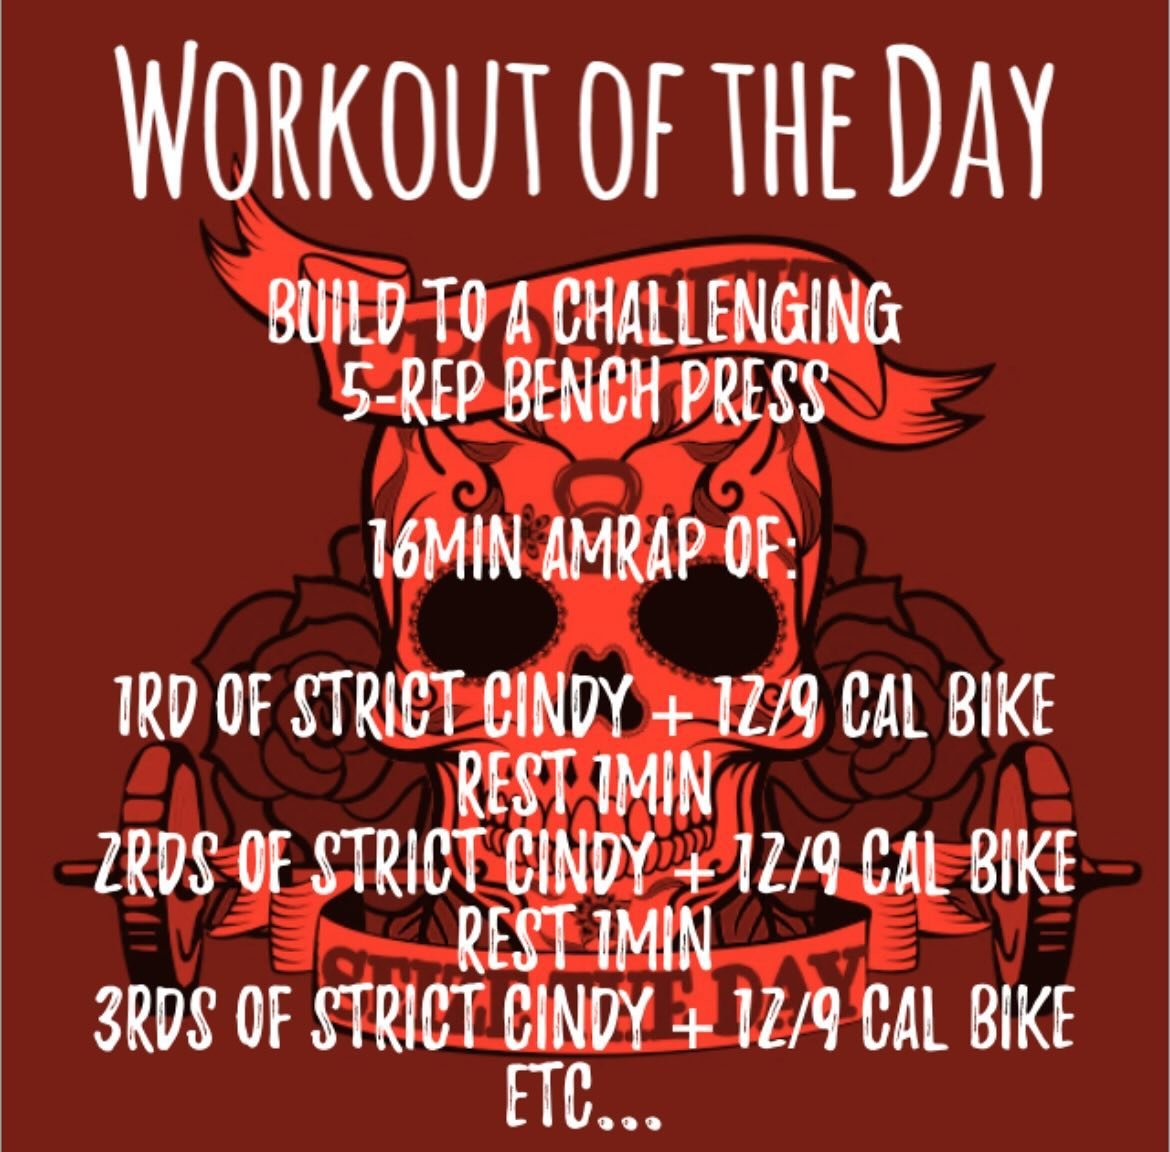 Friday April 26, 2024
Build to a challenging 5-rep Bench Press
&hellip;
16min amrap of:
 &lsquo;Strict Cindy&rsquo; (5 Strict Pull-ups + 10 Push-ups + 15 Air Squats) 
1rd of Strict Cindy + 12/9 cal Bike
Rest 1min
2rds of Strict Cindy + 12/9 cal Bike
